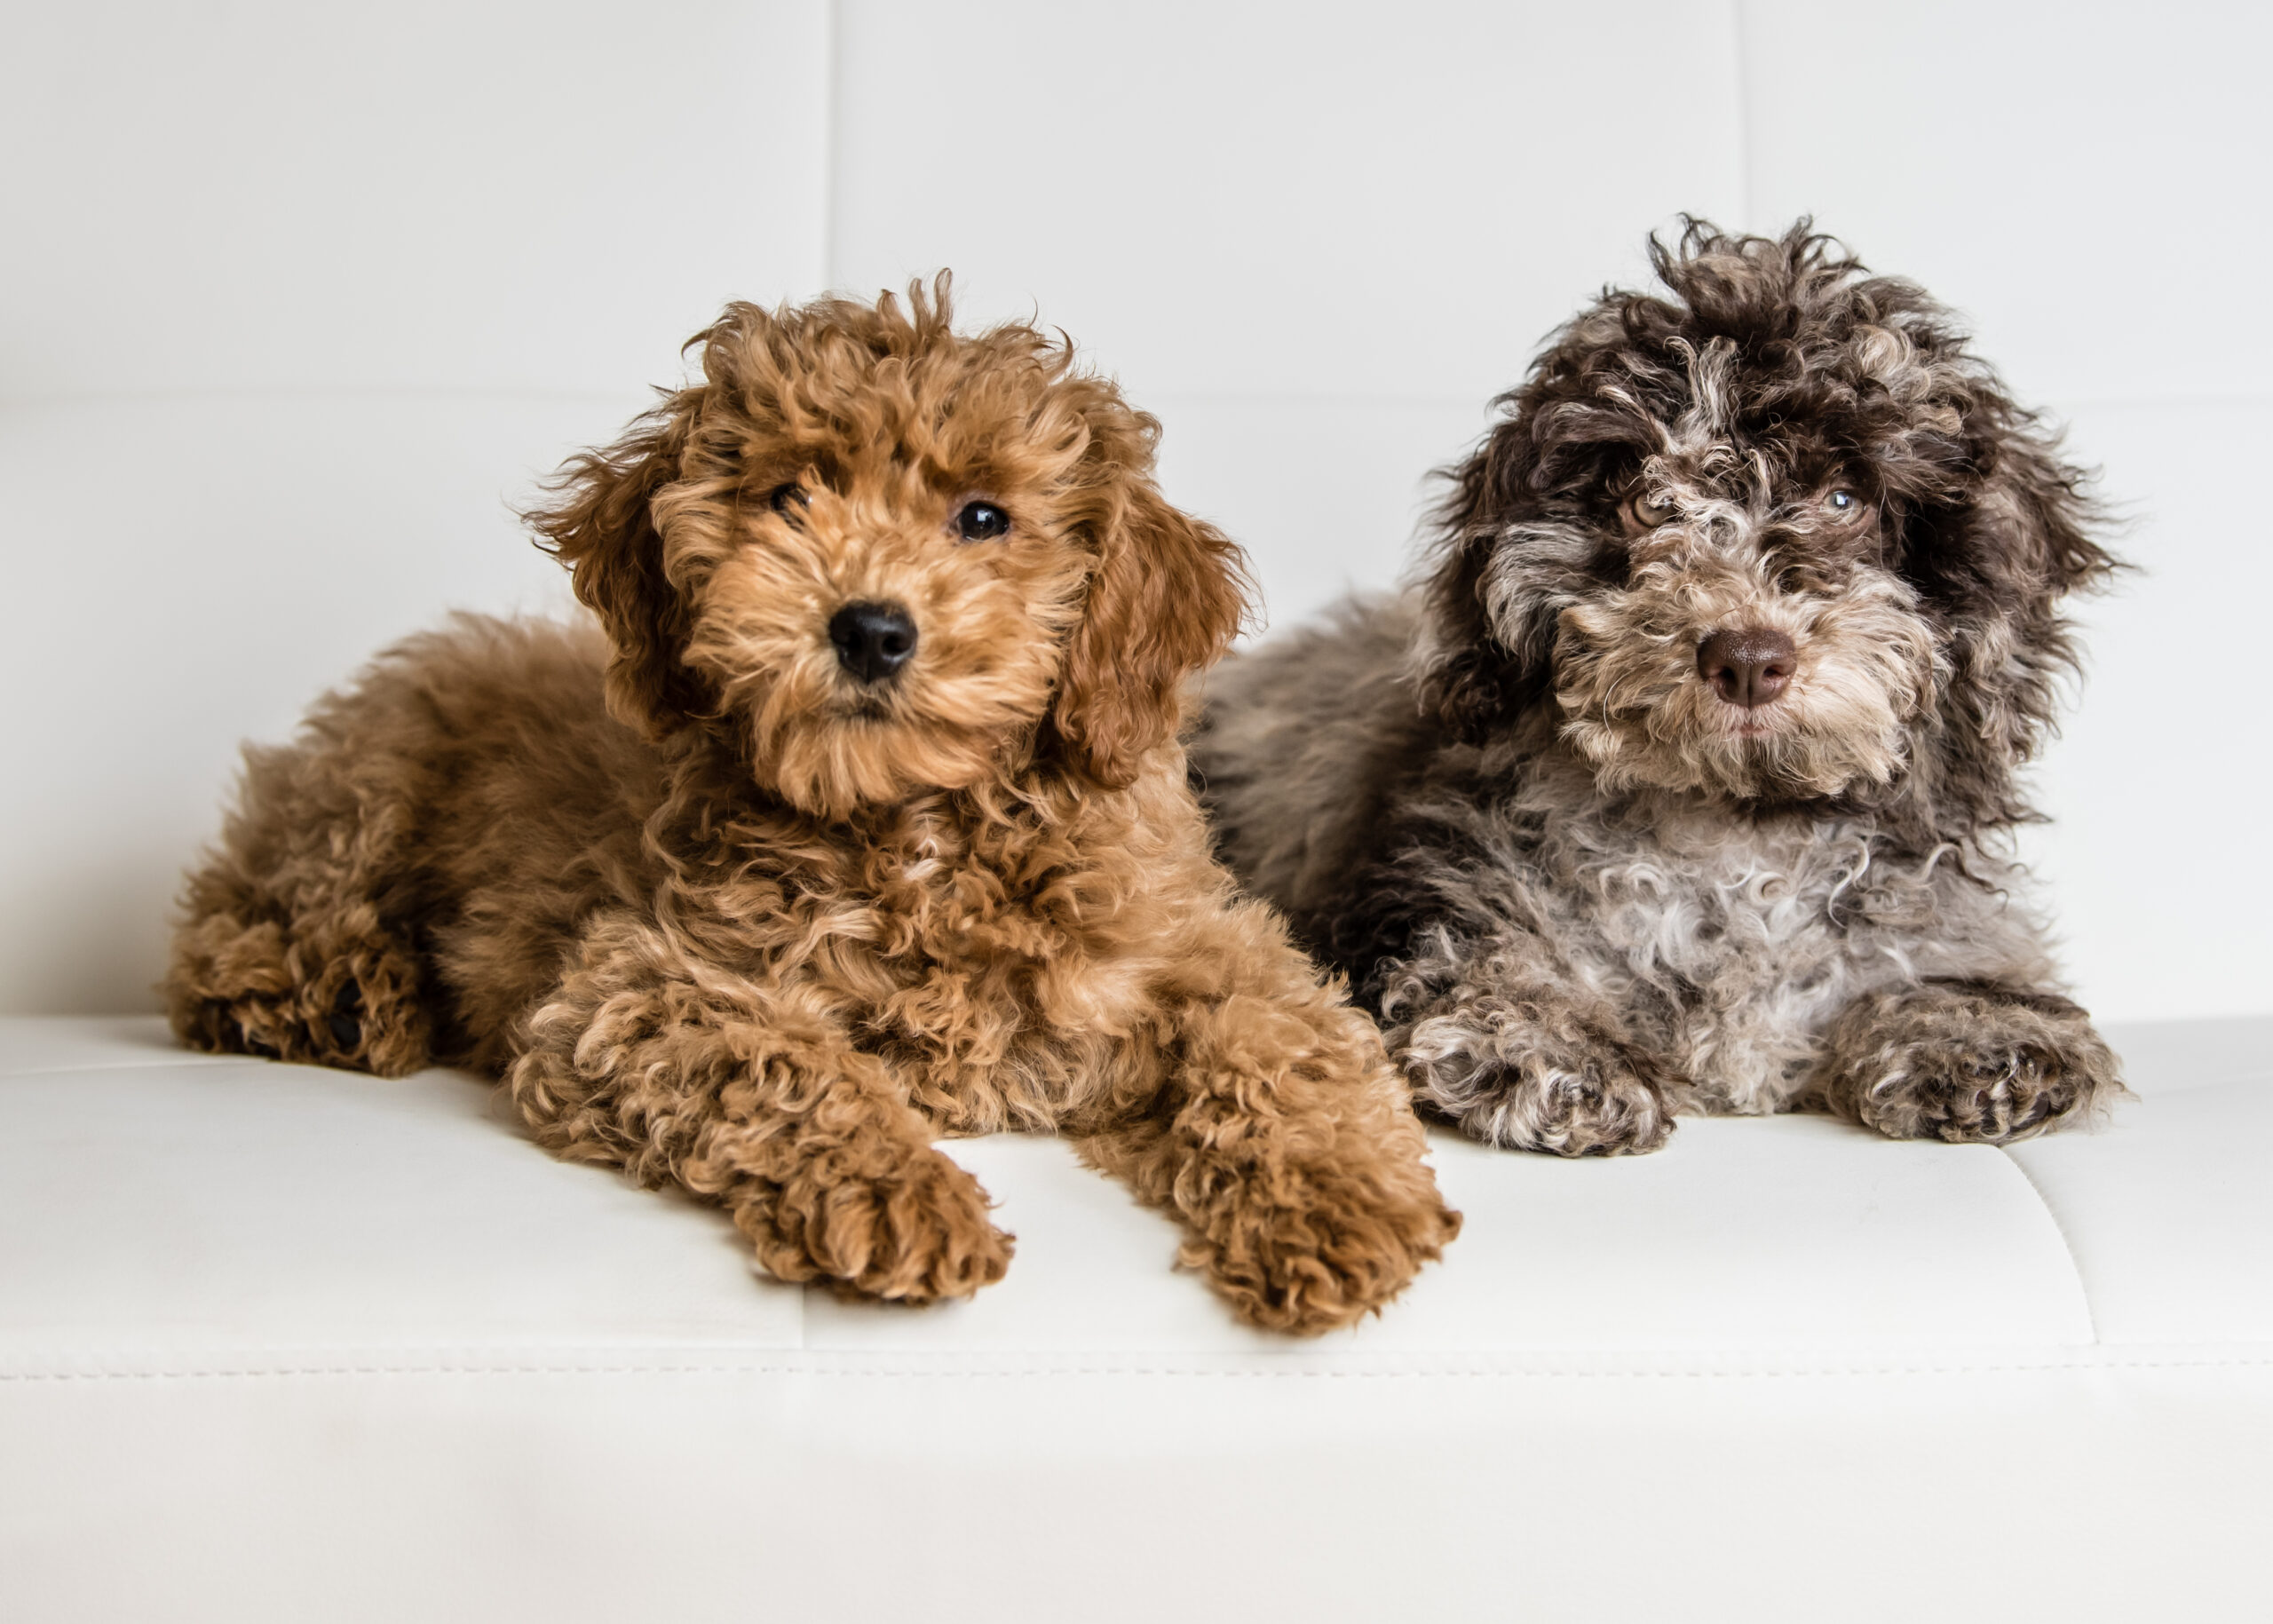 Mini Goldendoodles For Sale In Boston MA | Hopeful Dreams Family Puppies